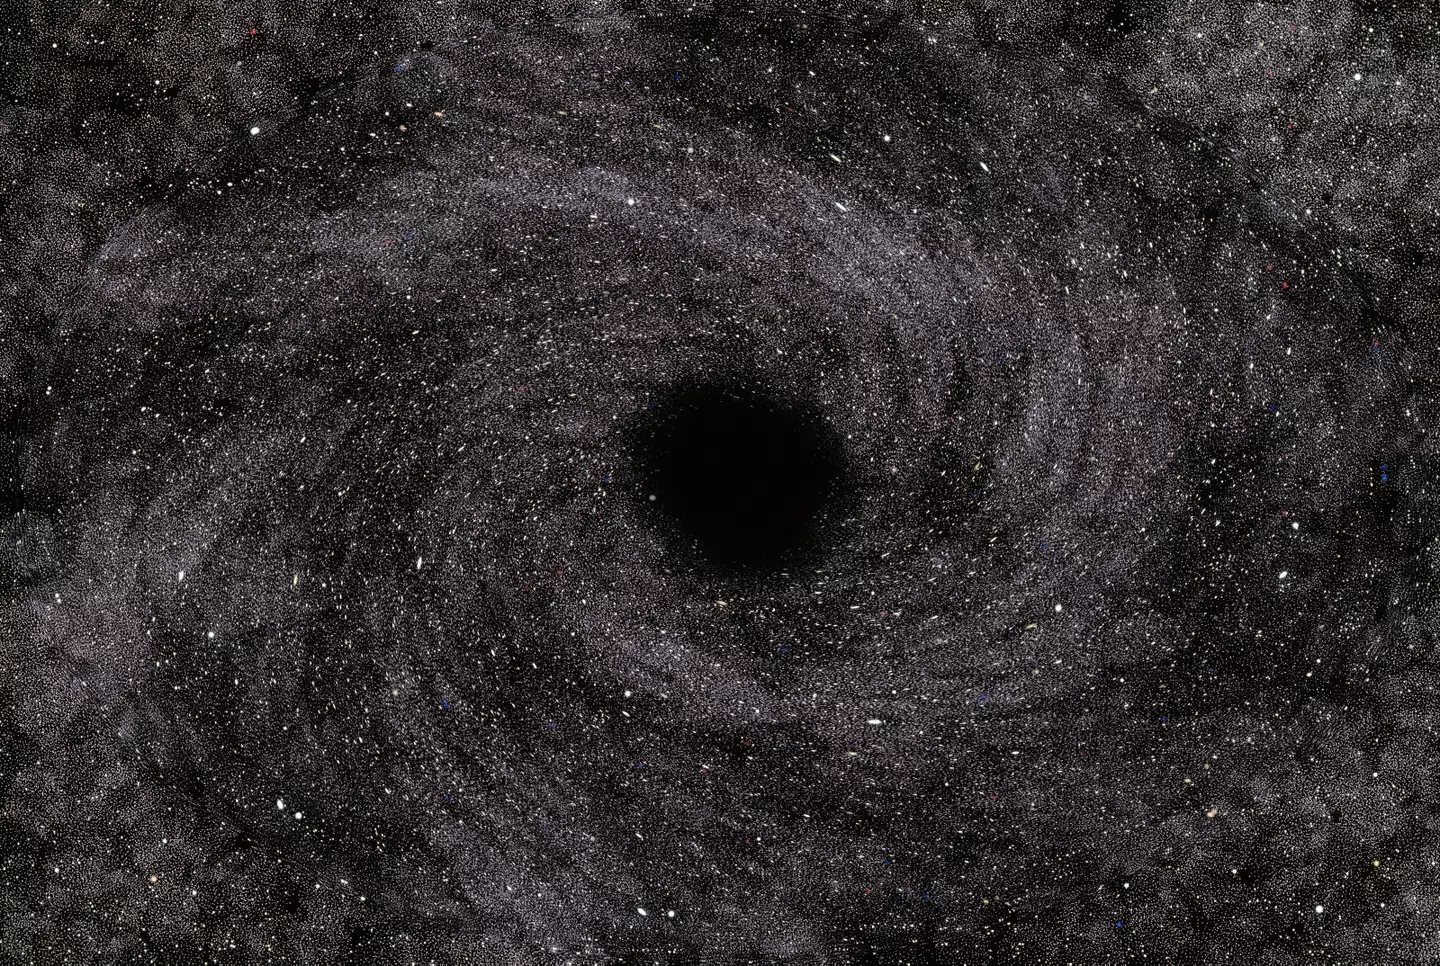 Black holes have such a strong gravitational pull, not even light can escape them.